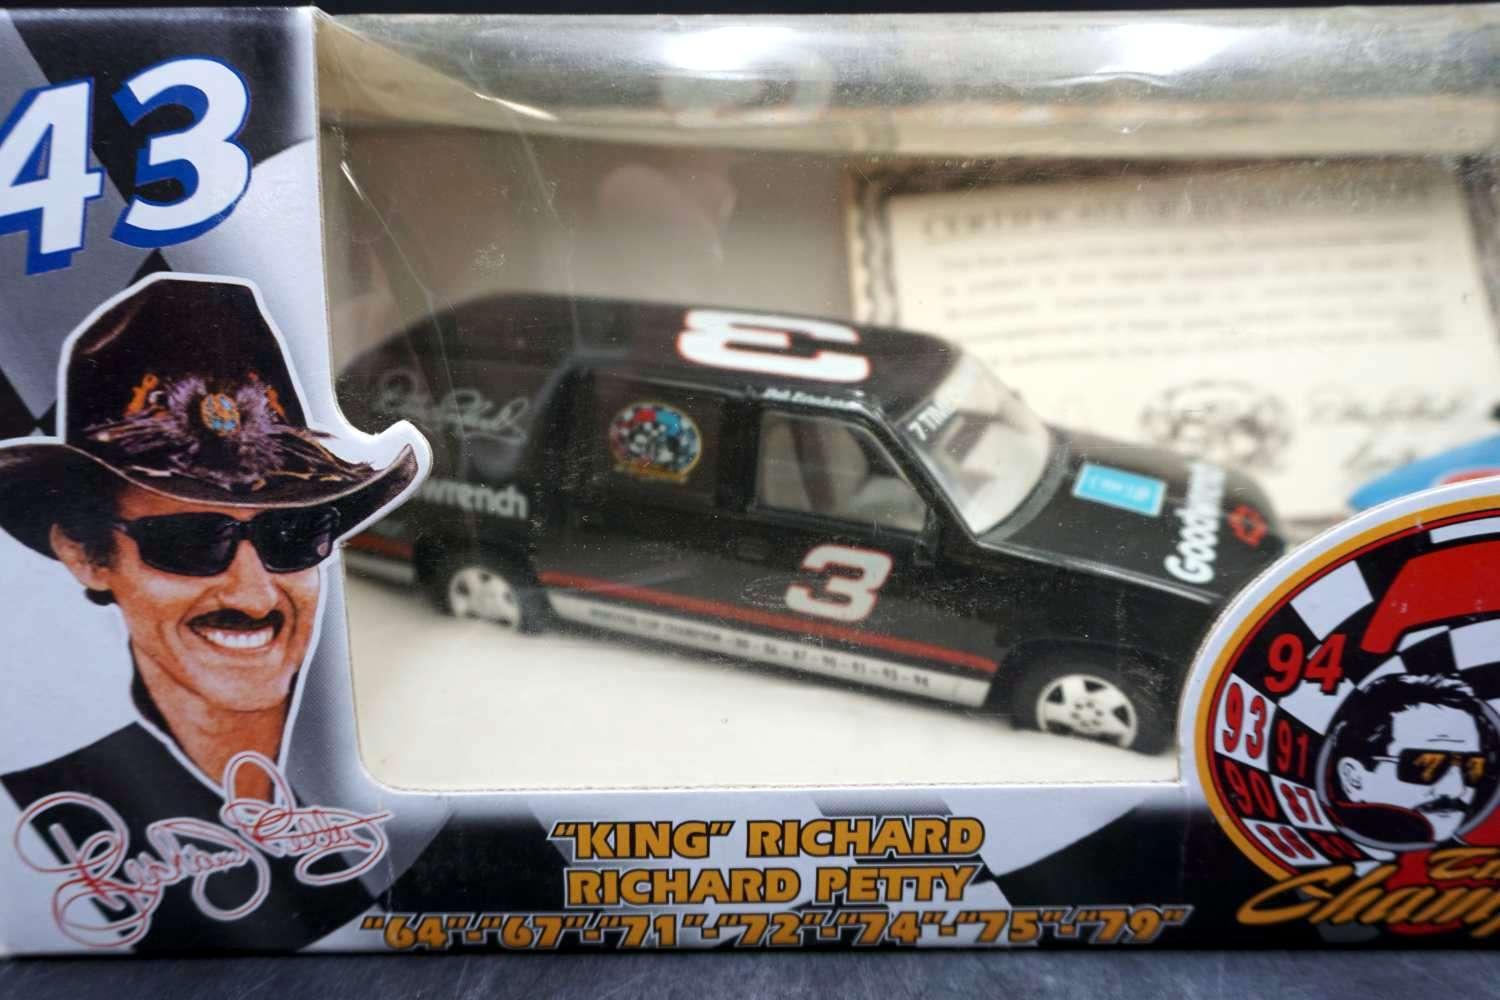 Two Truck Limited Edition, Richard Petty & Dale Earnhardt 1/25